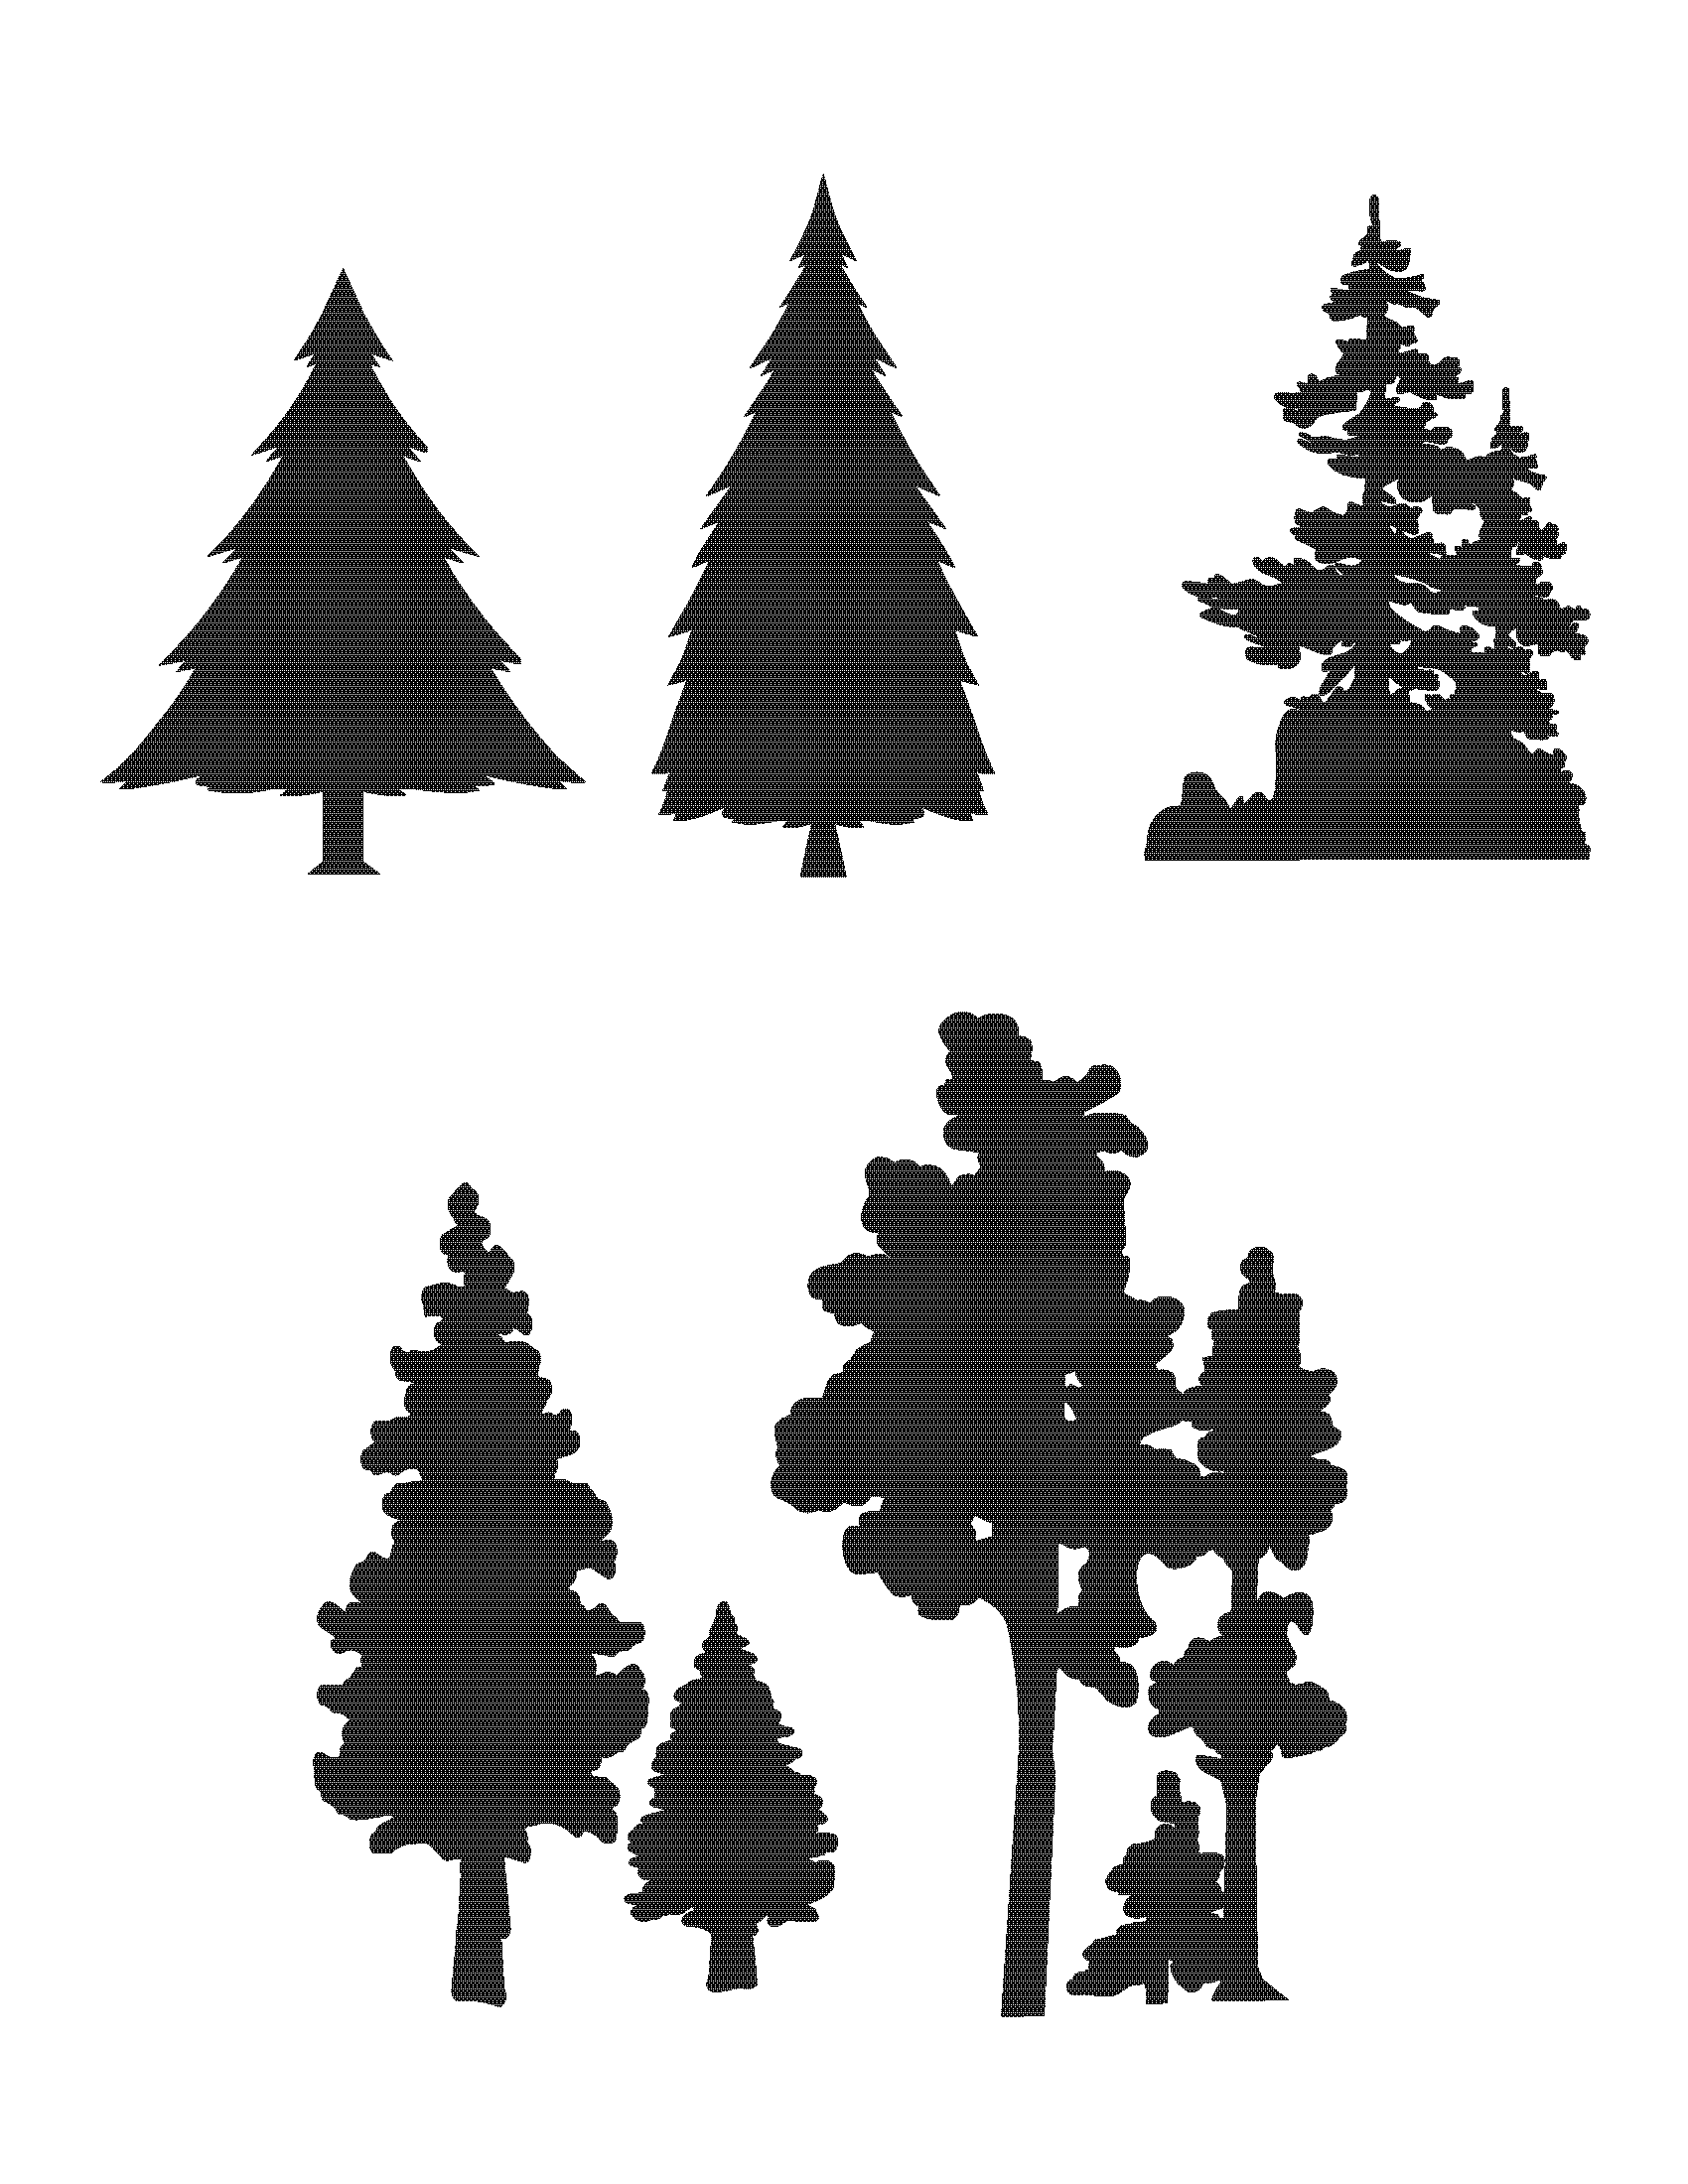 Landscaping Clipart